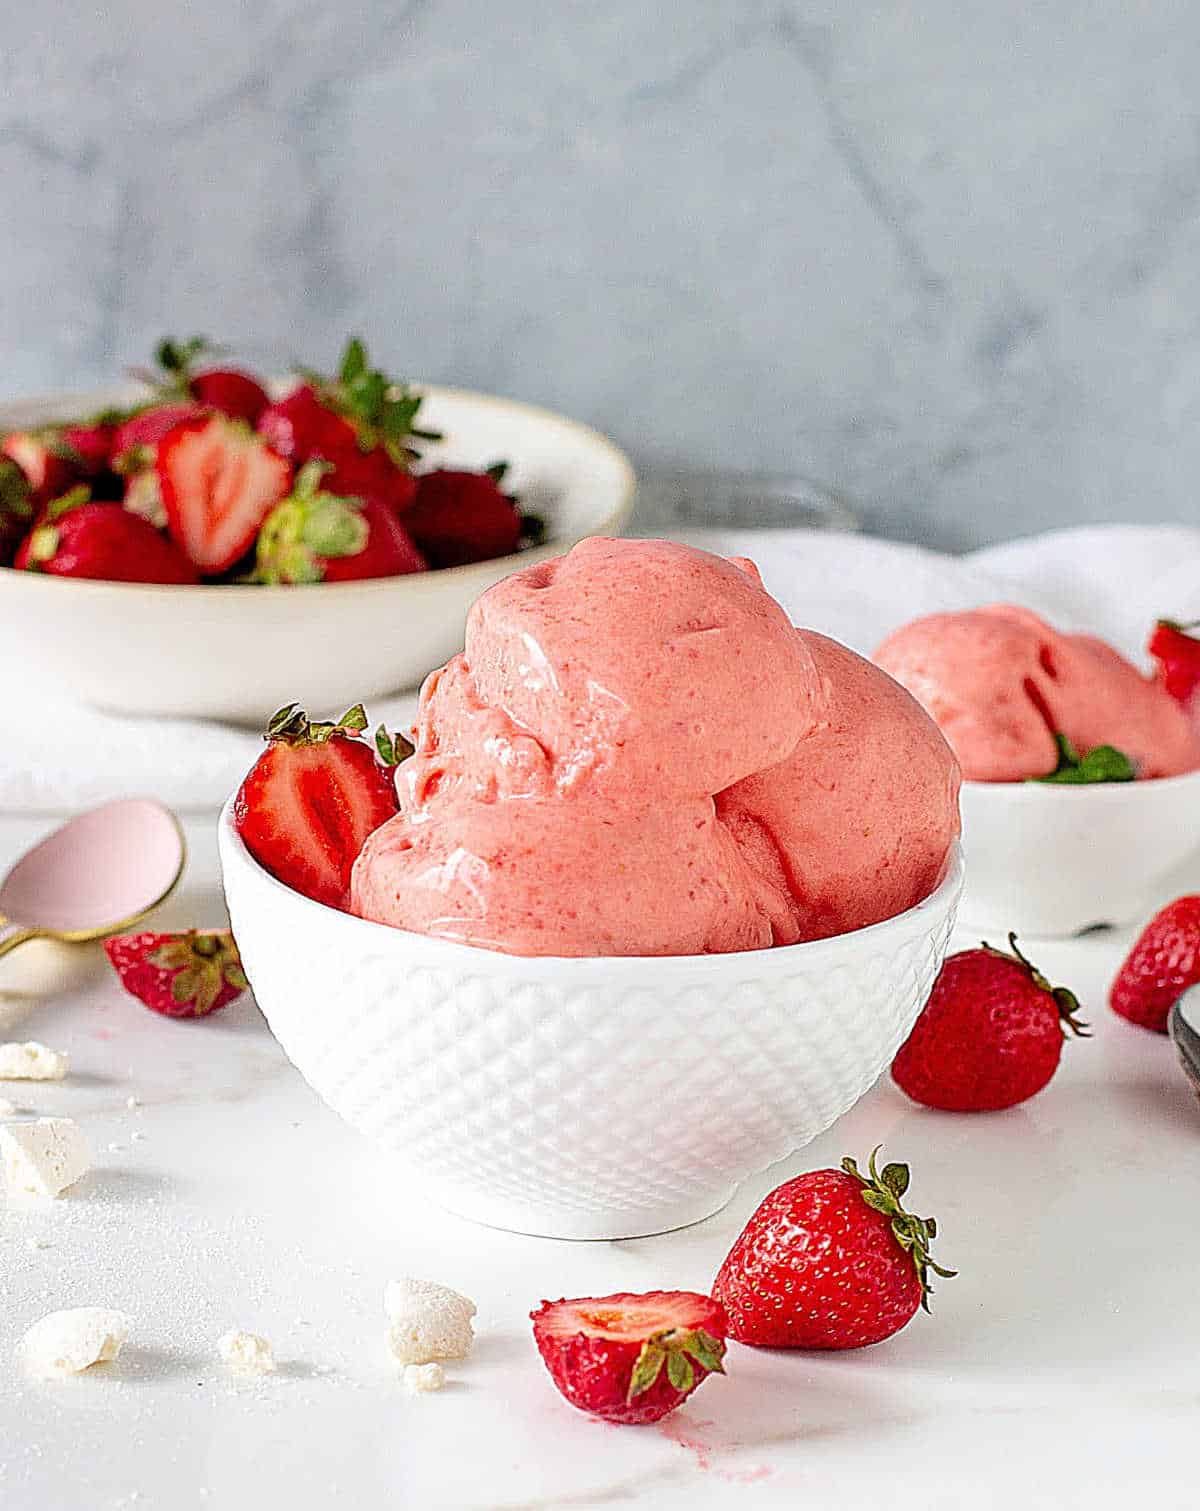 Several scoops of strawberry ice cream in white bowl, more strawberries around, white surface, grey background